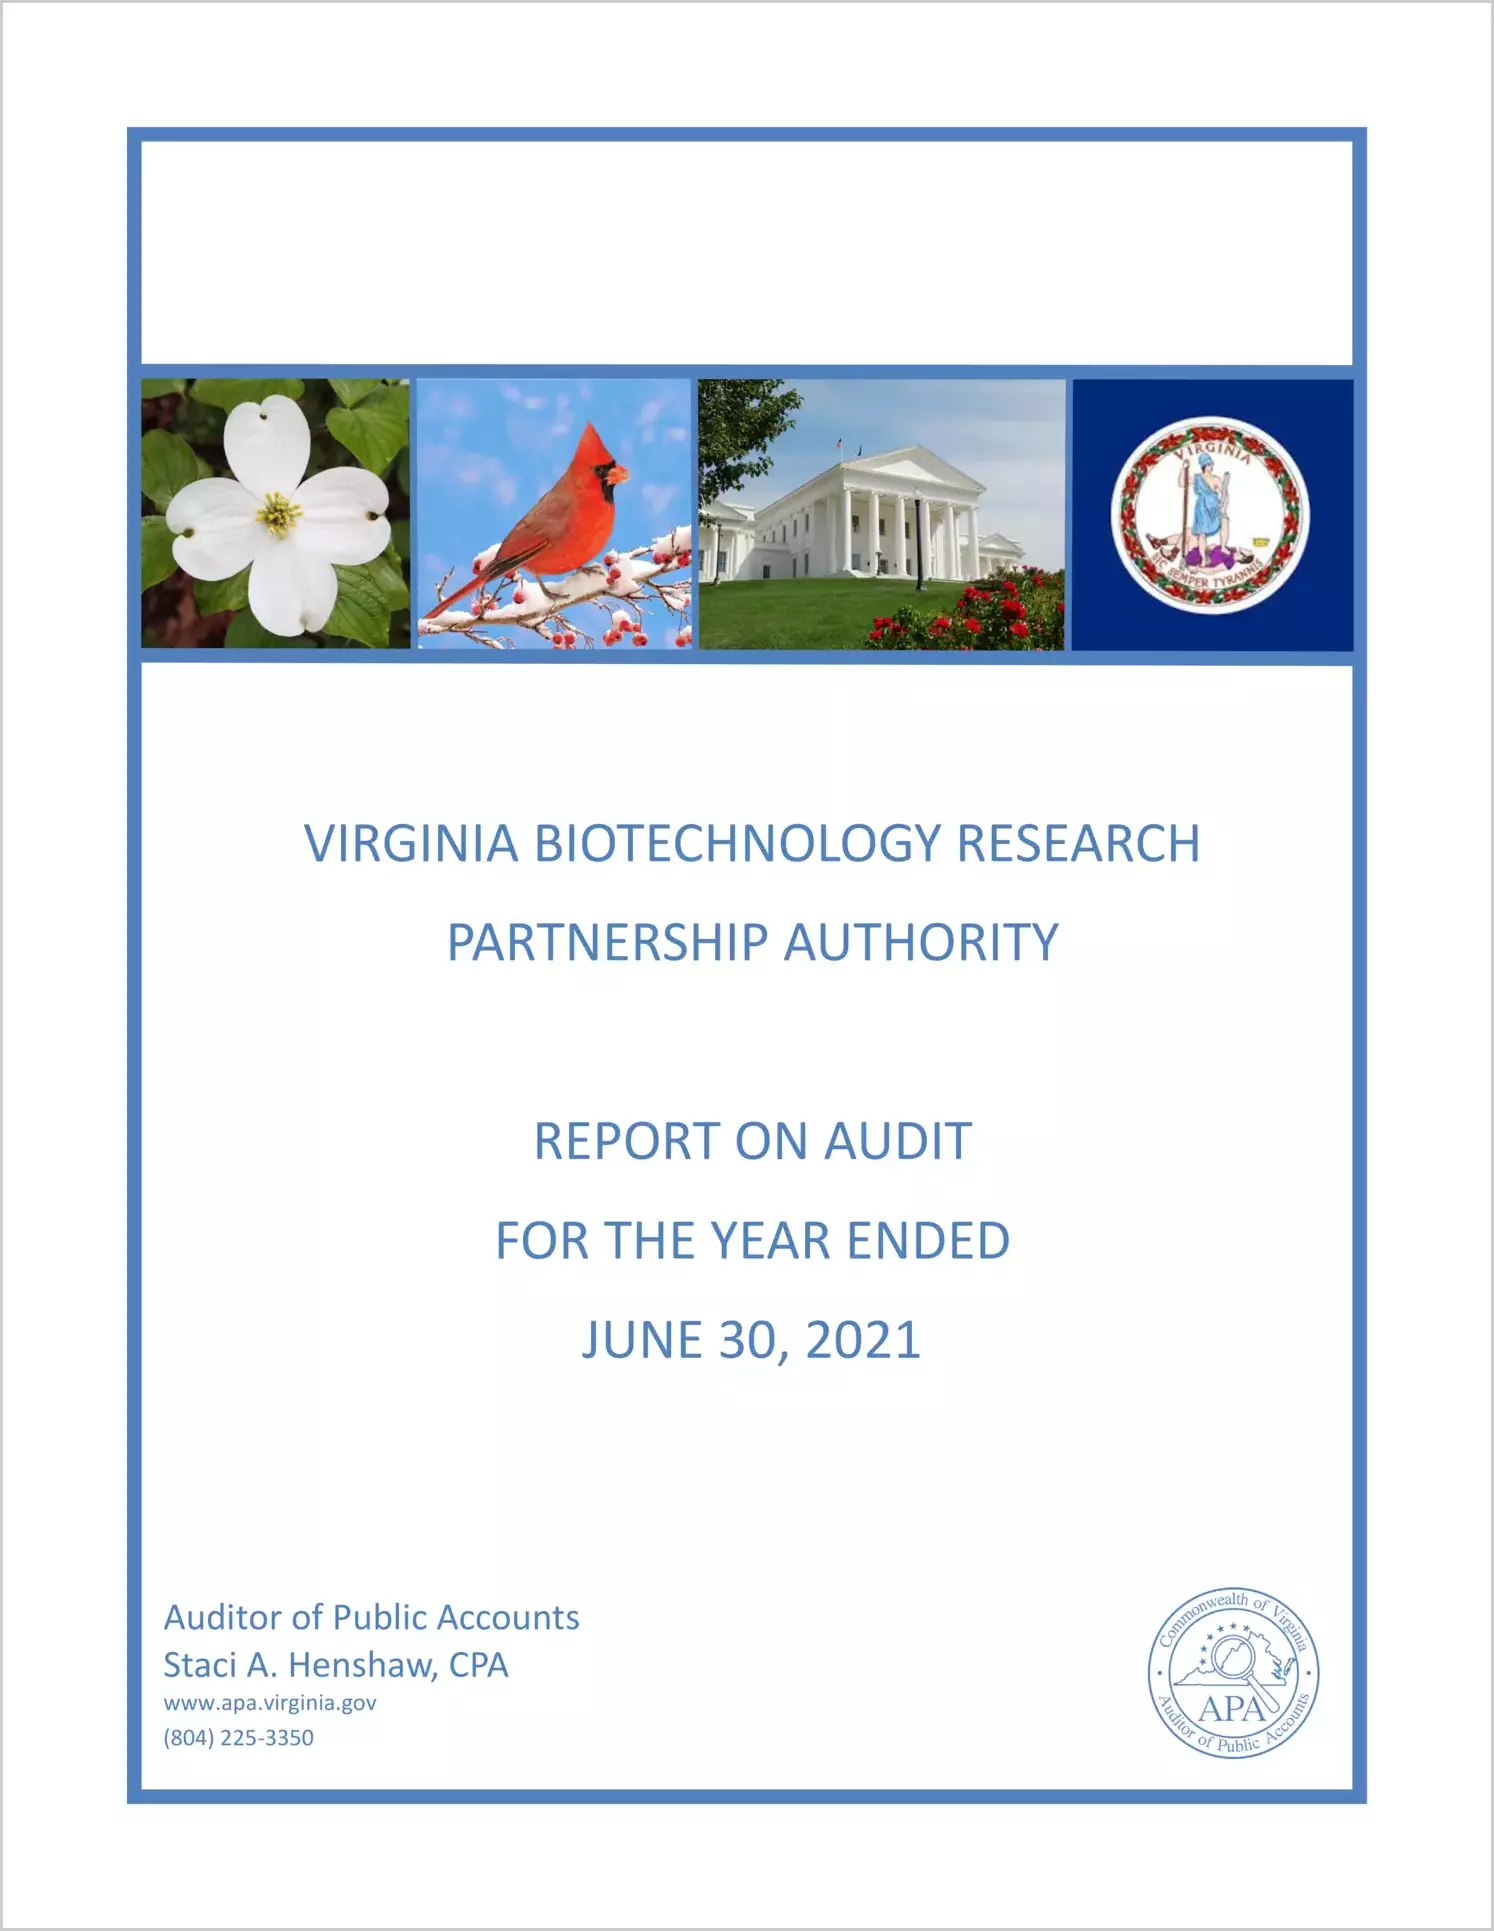 Virginia Biotechnology Research Partnership Authority for the year ended June 30, 2021